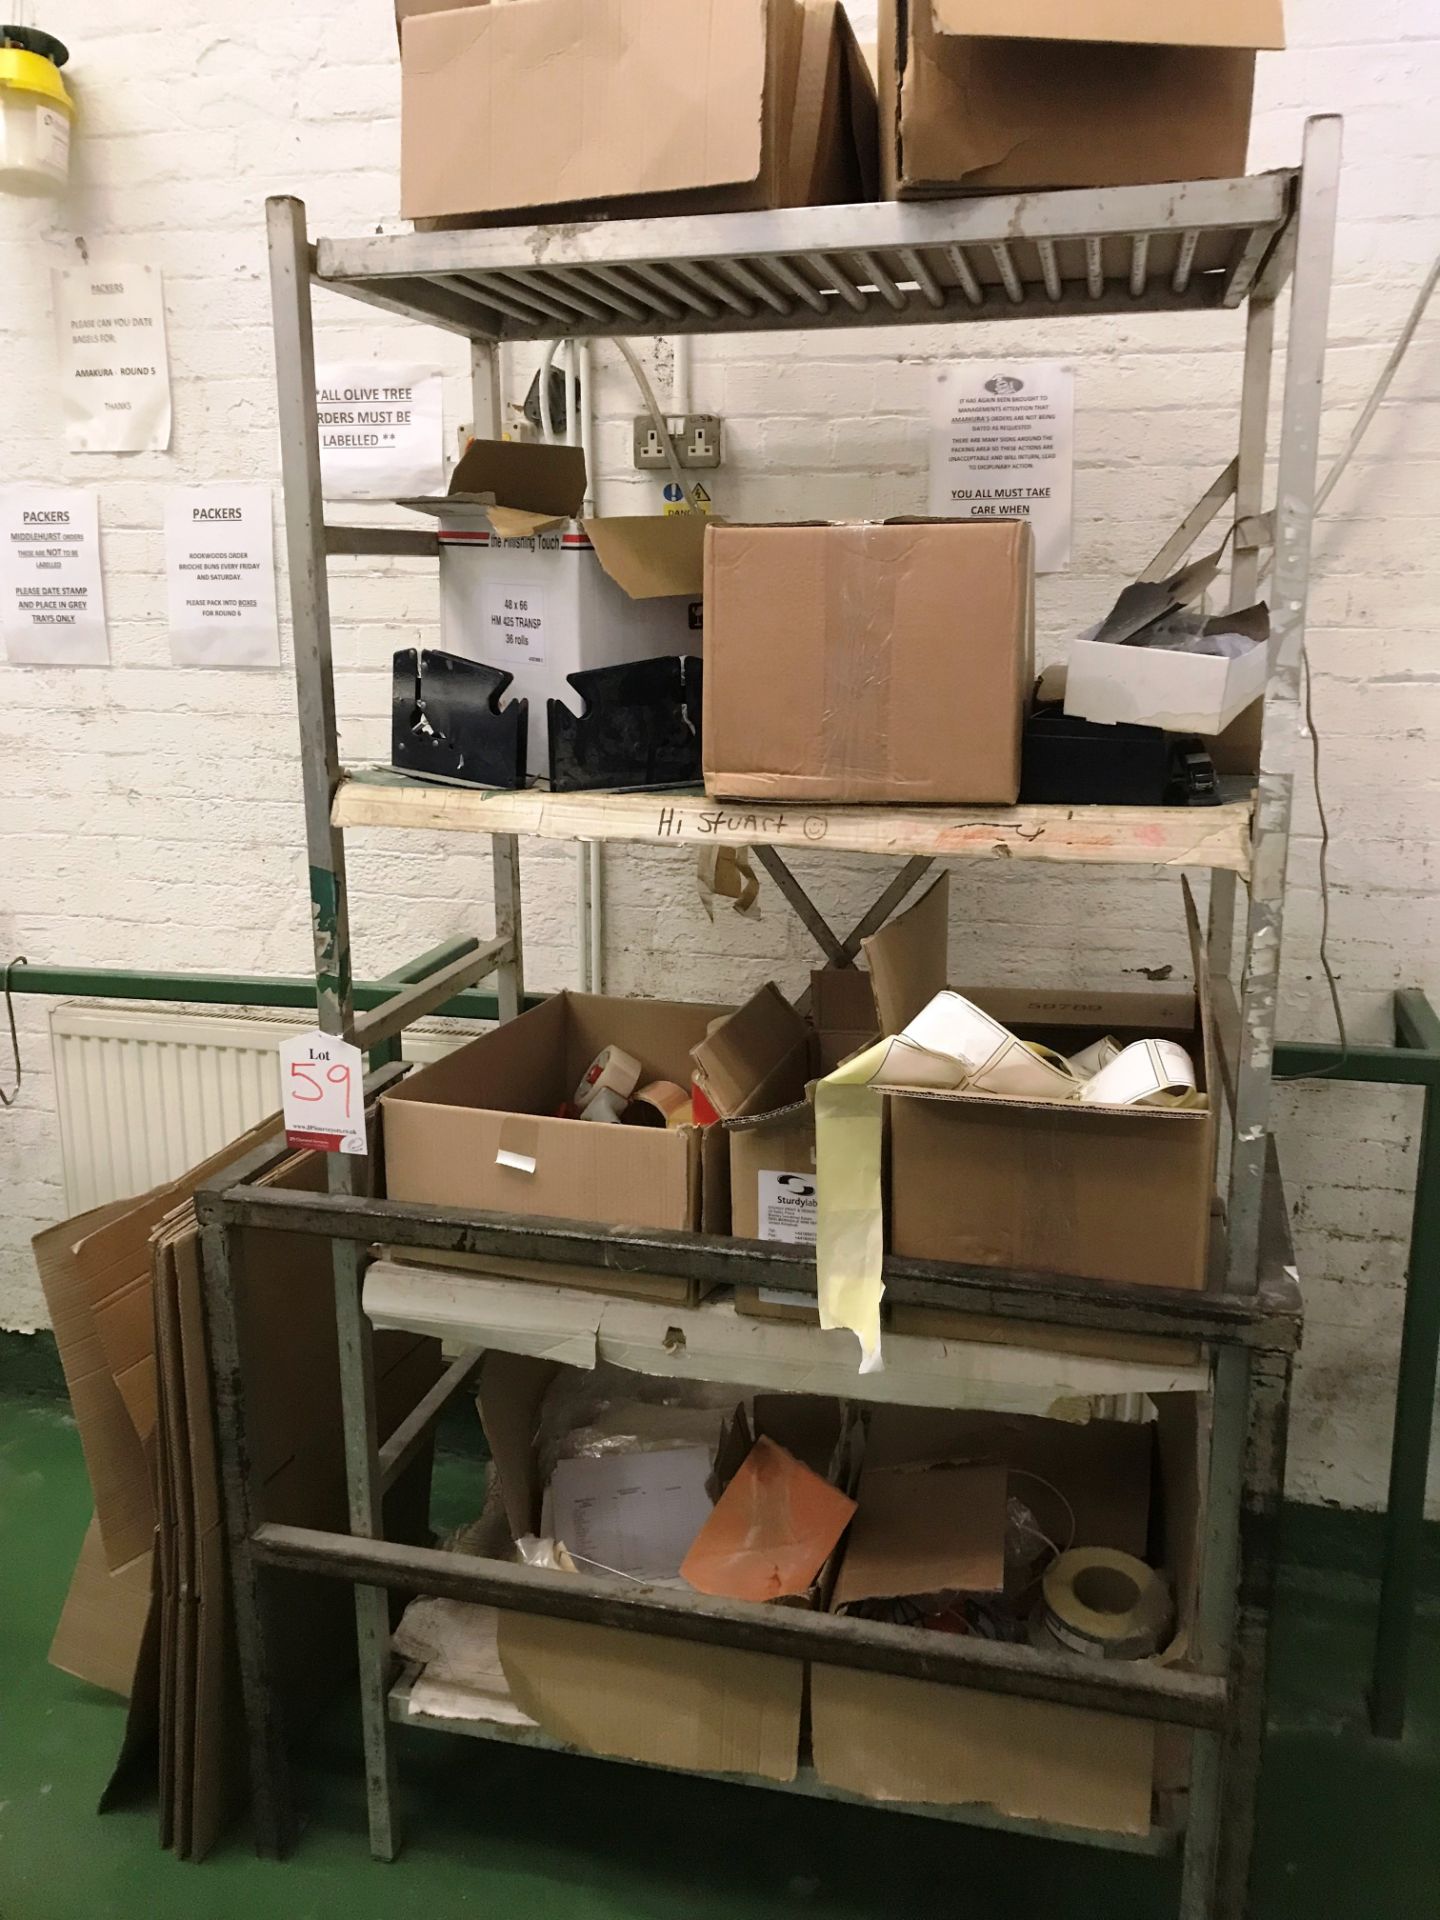 4 Tier Metal Rack w/ Packaging Stock & Equipment - As Pictured